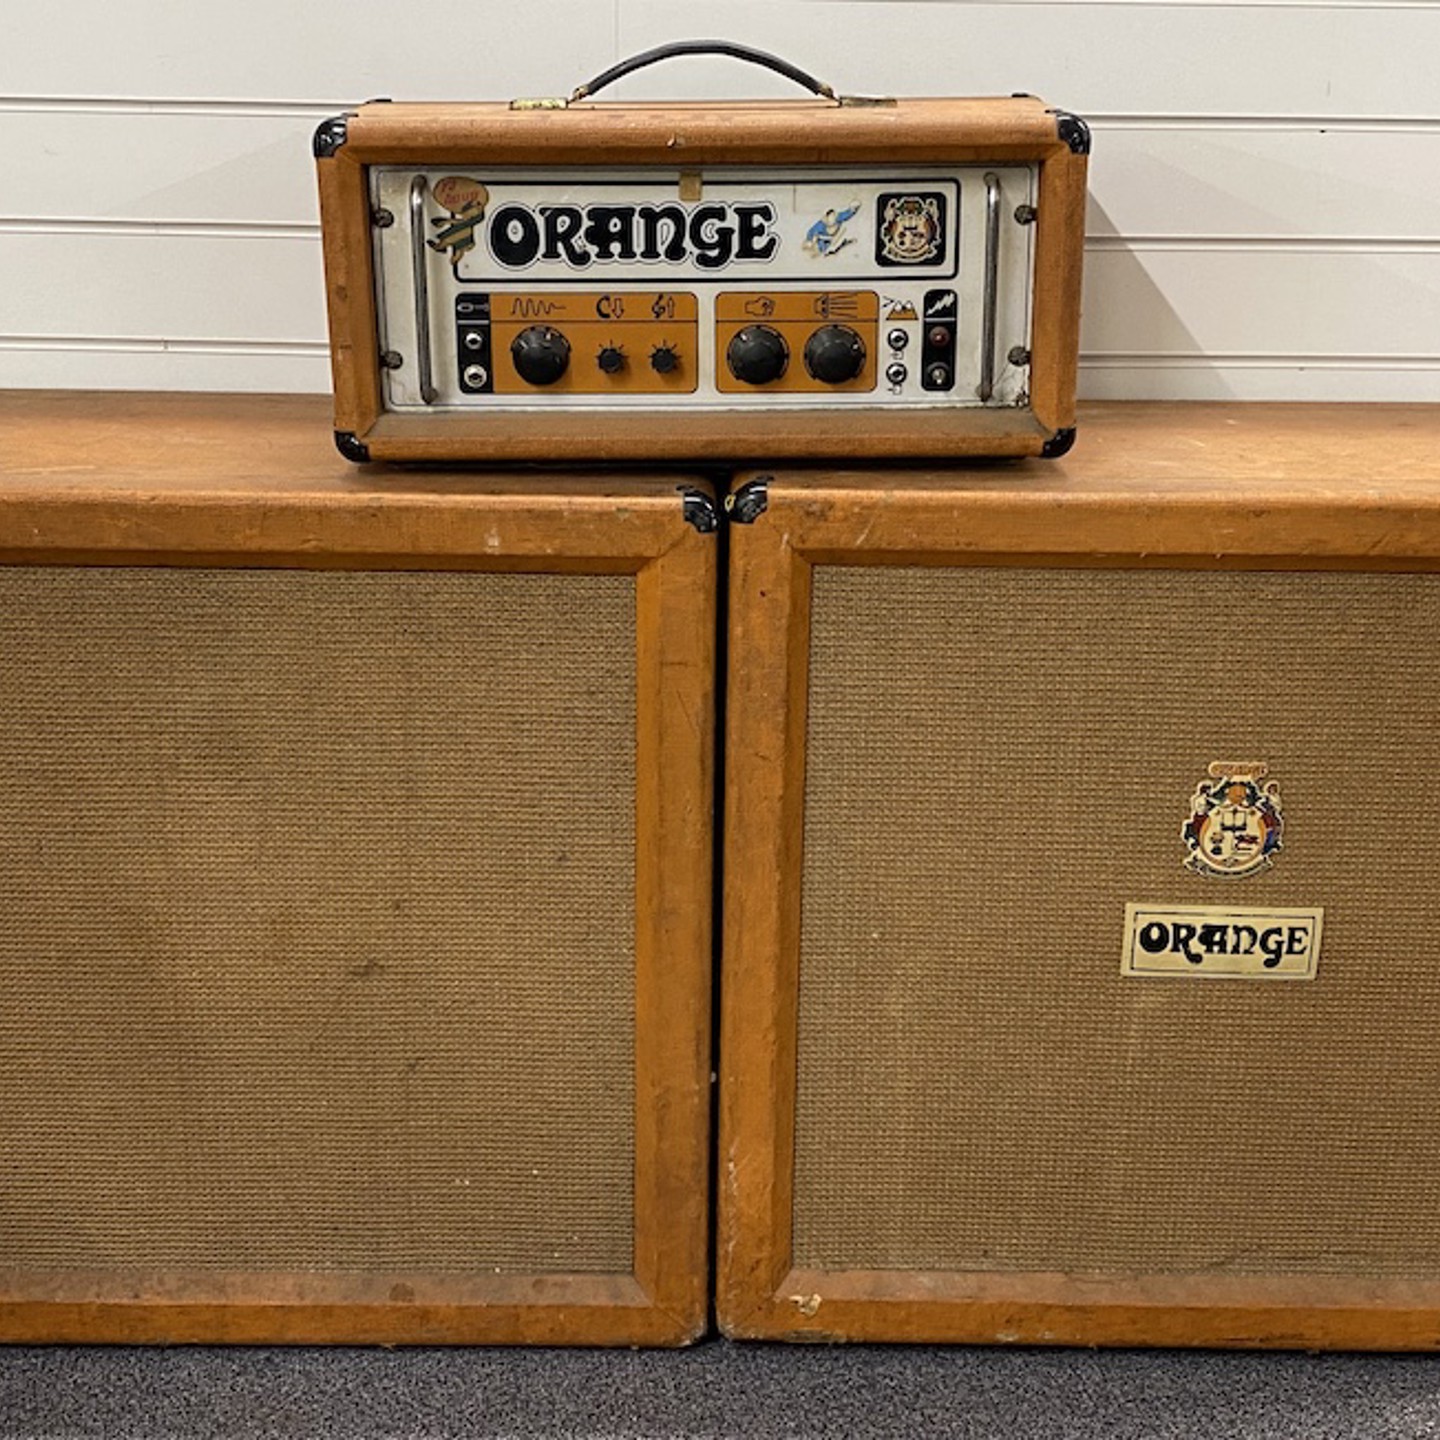 Orange Of London Amplifier Model OR 120 And Matching Stage Speakers Sold Ś1,950